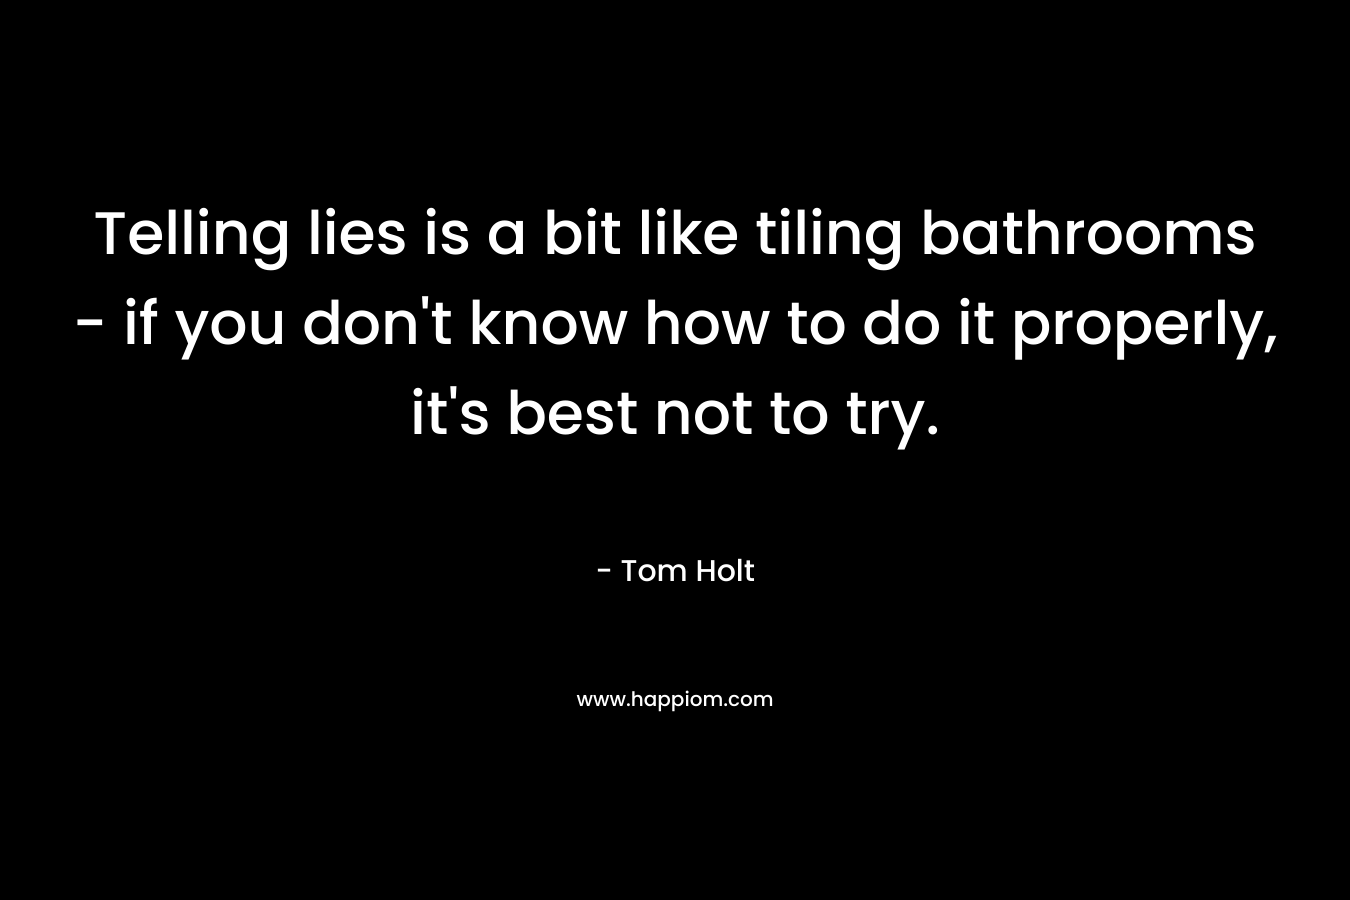 Telling lies is a bit like tiling bathrooms – if you don’t know how to do it properly, it’s best not to try. – Tom Holt